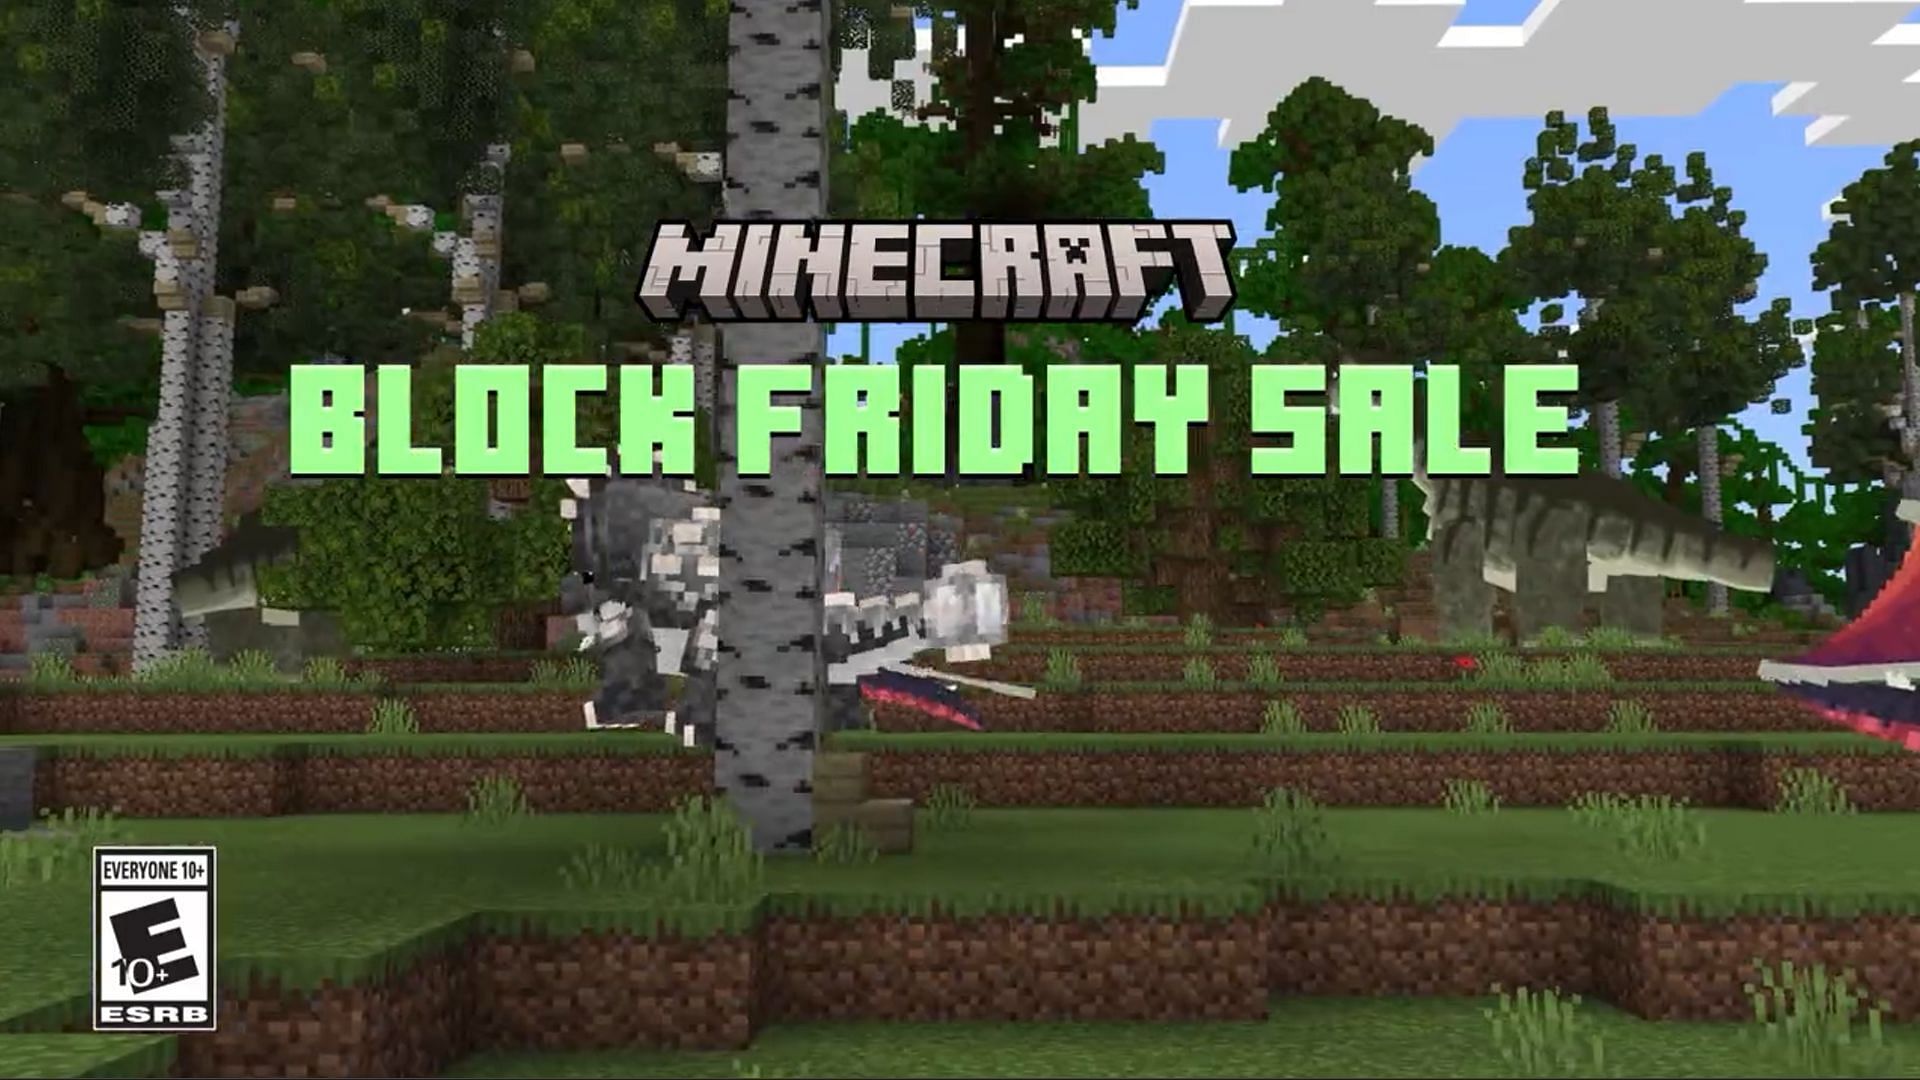 Minecraft marketplace is hosting black friday sale in the Bedrock Edition